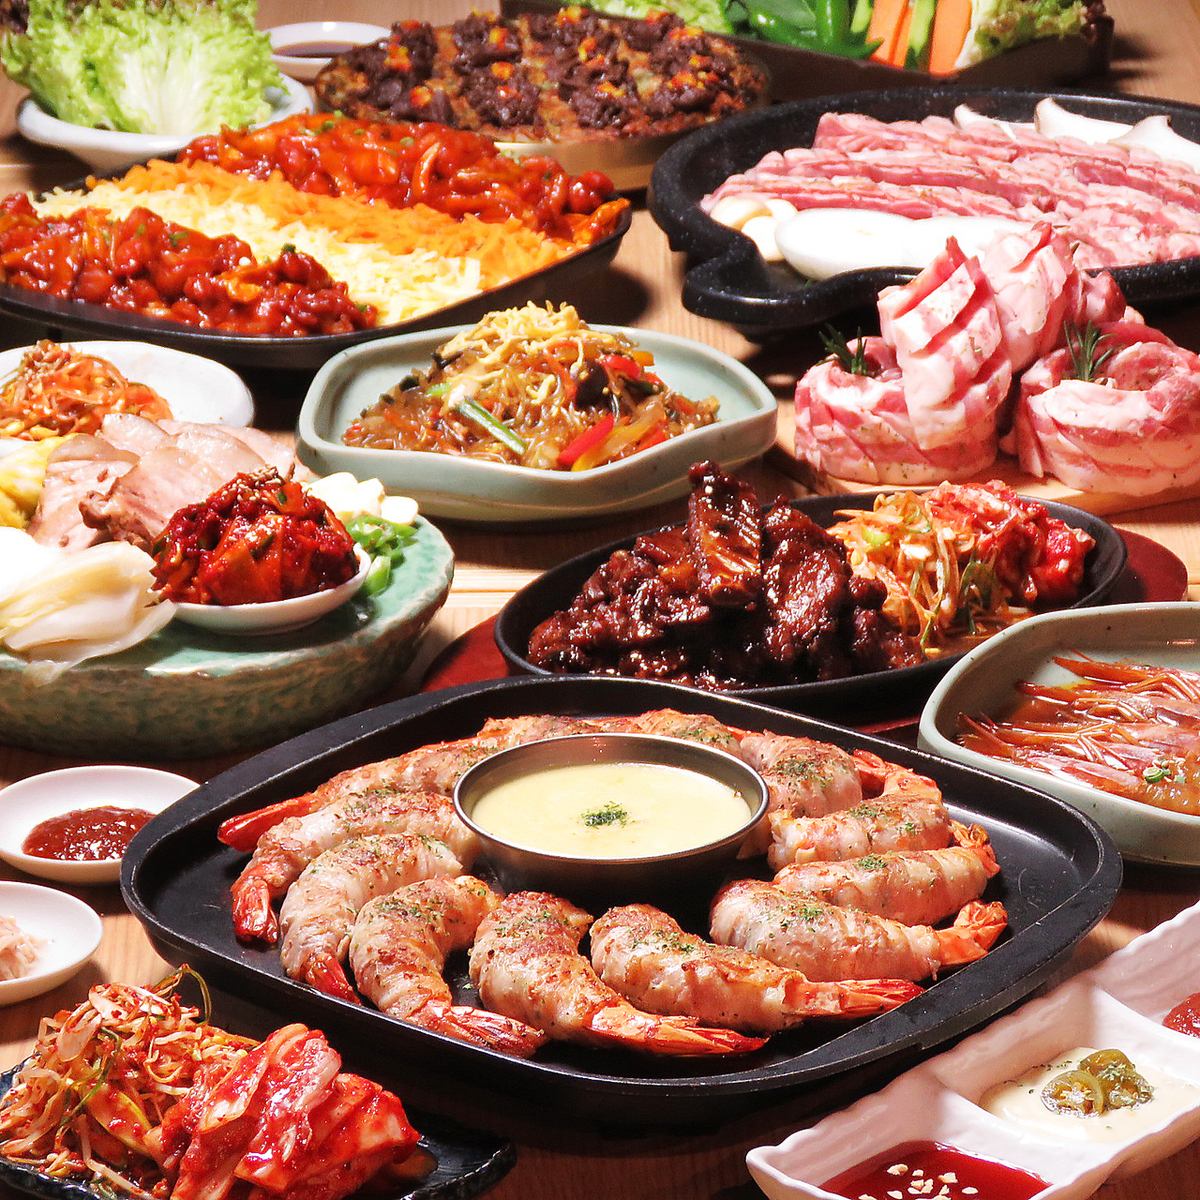 Open for lunch from 11:30 to 15:00 ◎ Enjoy authentic Korean food ♪